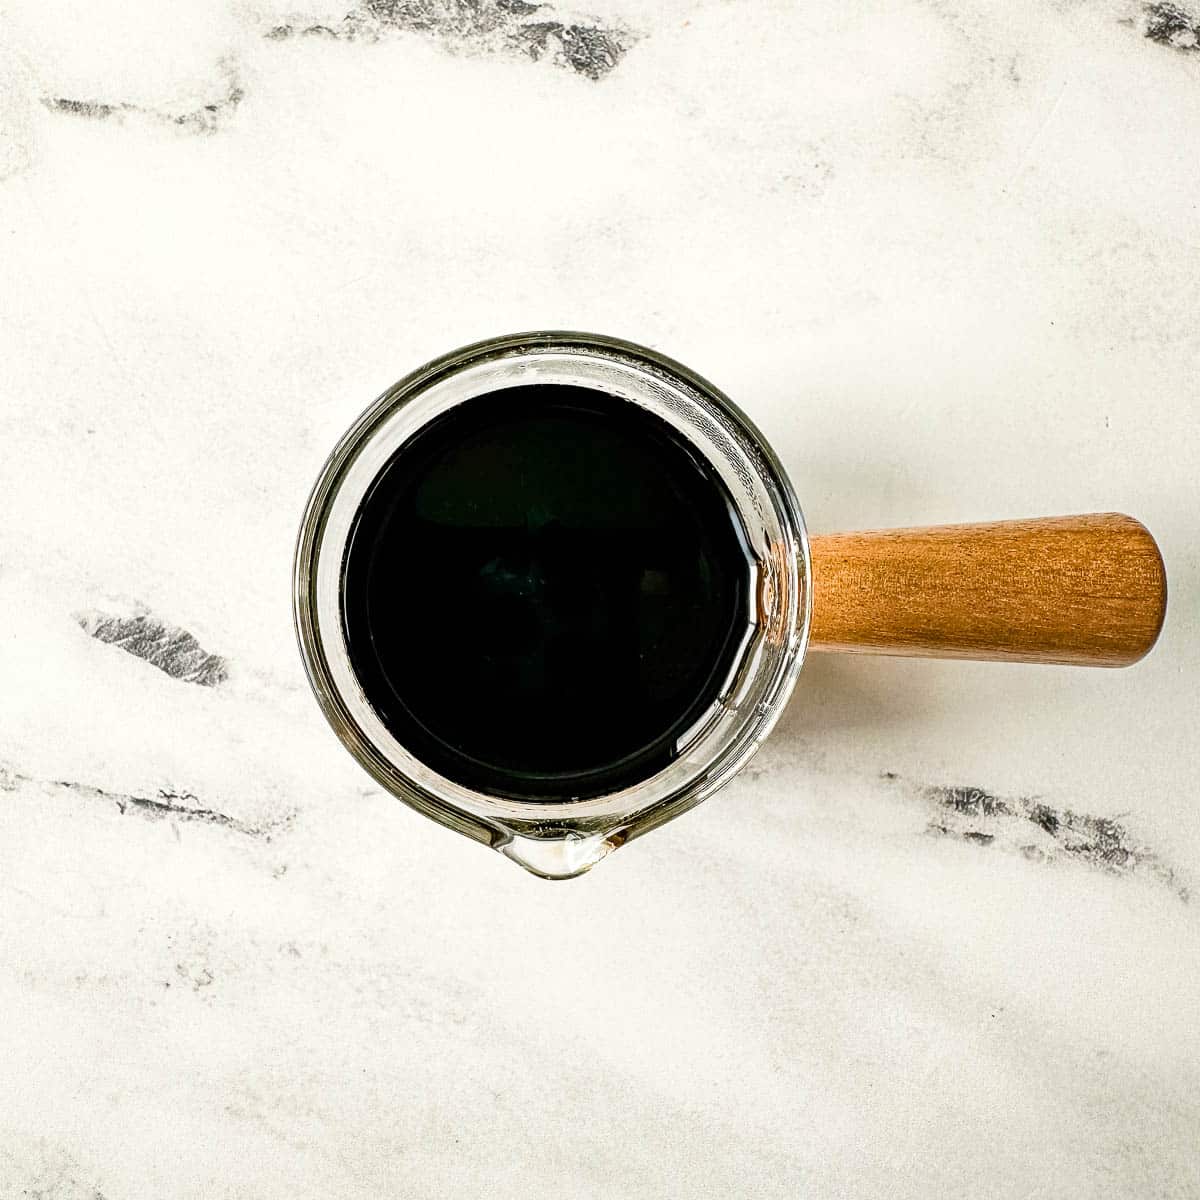 Balsamic Vinegar in Small Pitcher with wooden handle.